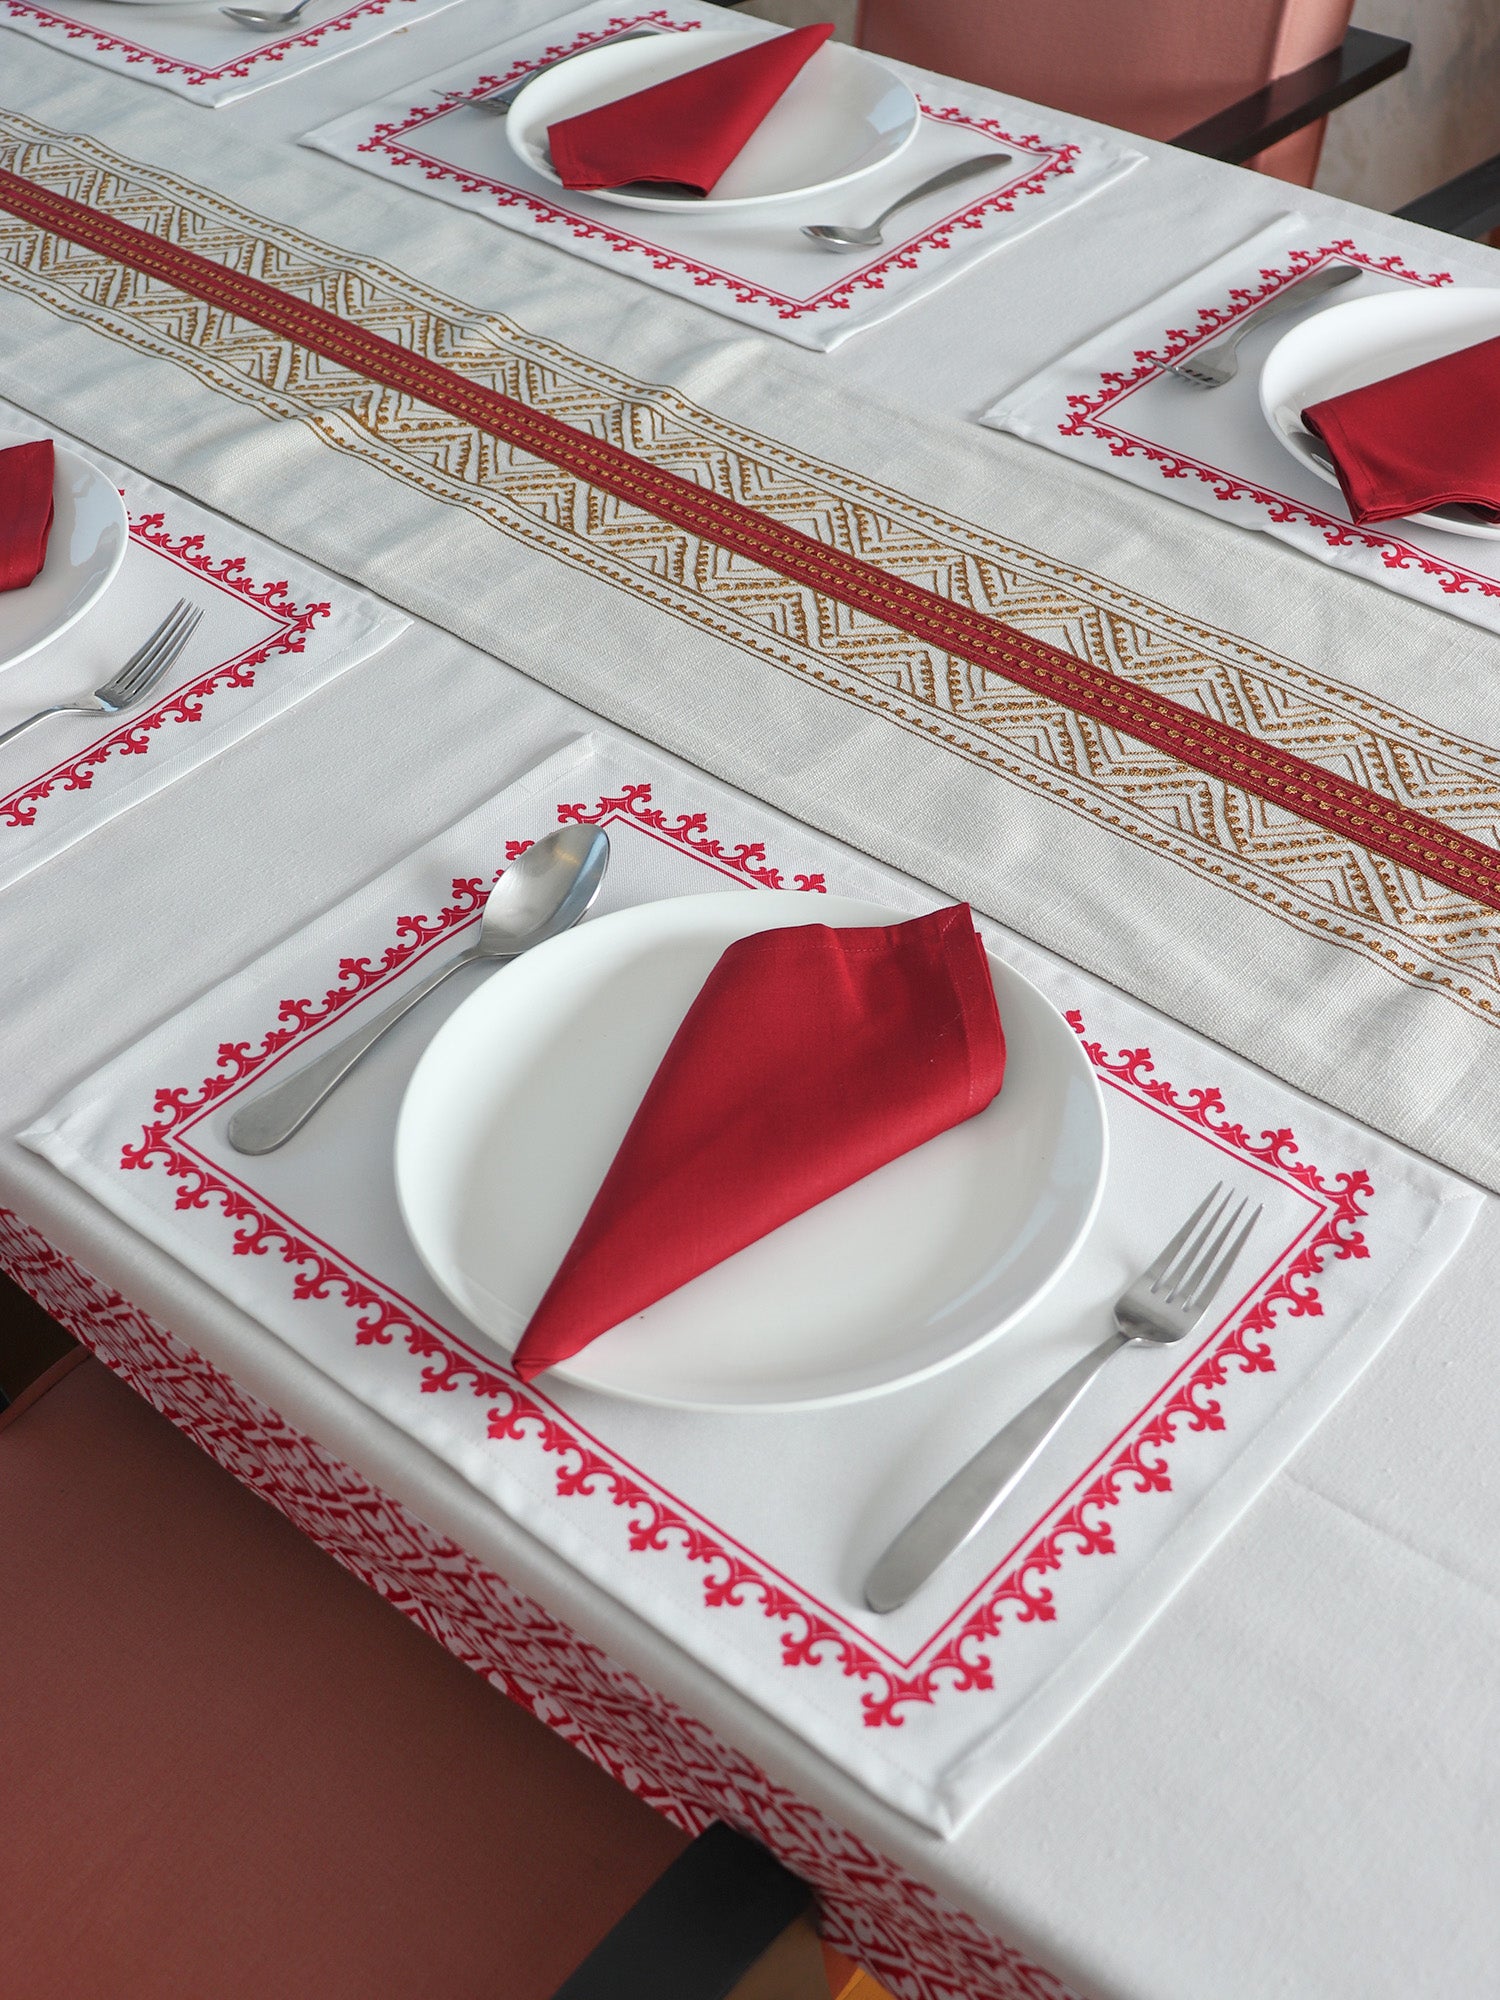 Printed Tablemats and Napkins Set | Cotton Blend - White and Red | Set of 6 Mats 13x18 in & Set of 6 Dining Napkins 16x16in